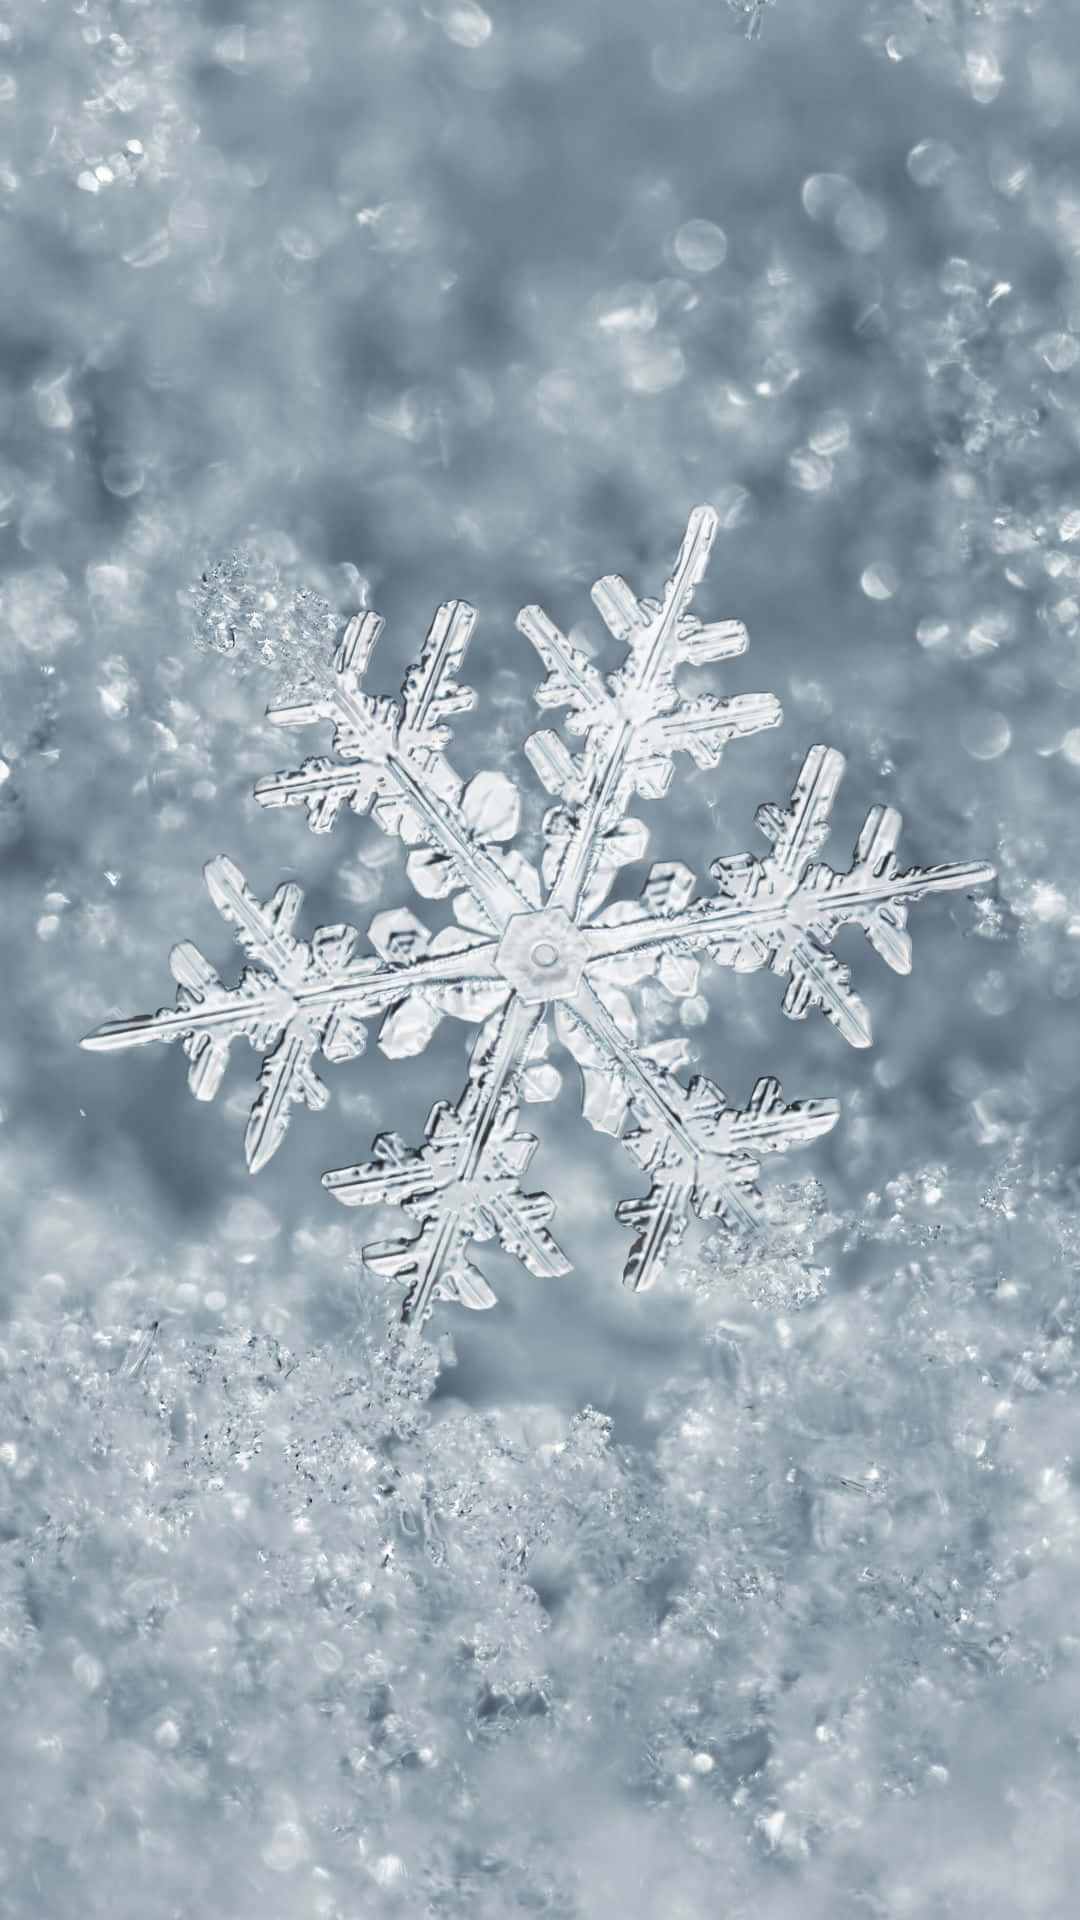 Cute Winter Snowflake In Middle Phone Background